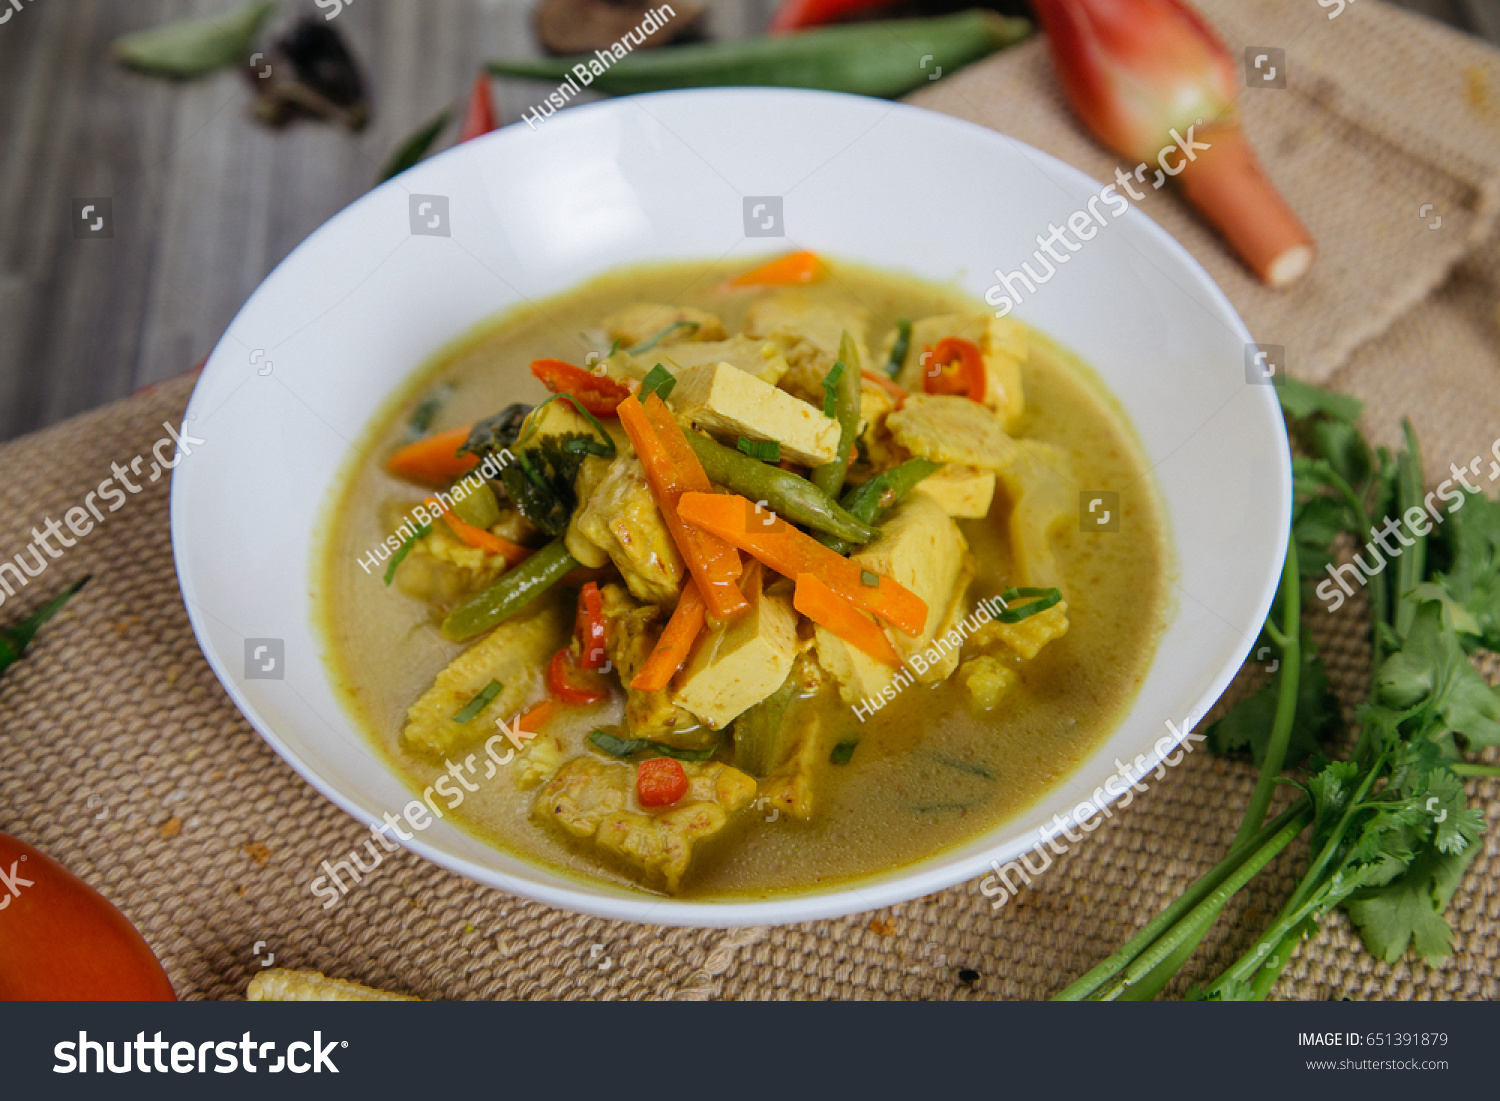 Homemade vegetable tofu spicy dish with selective focus #651391879